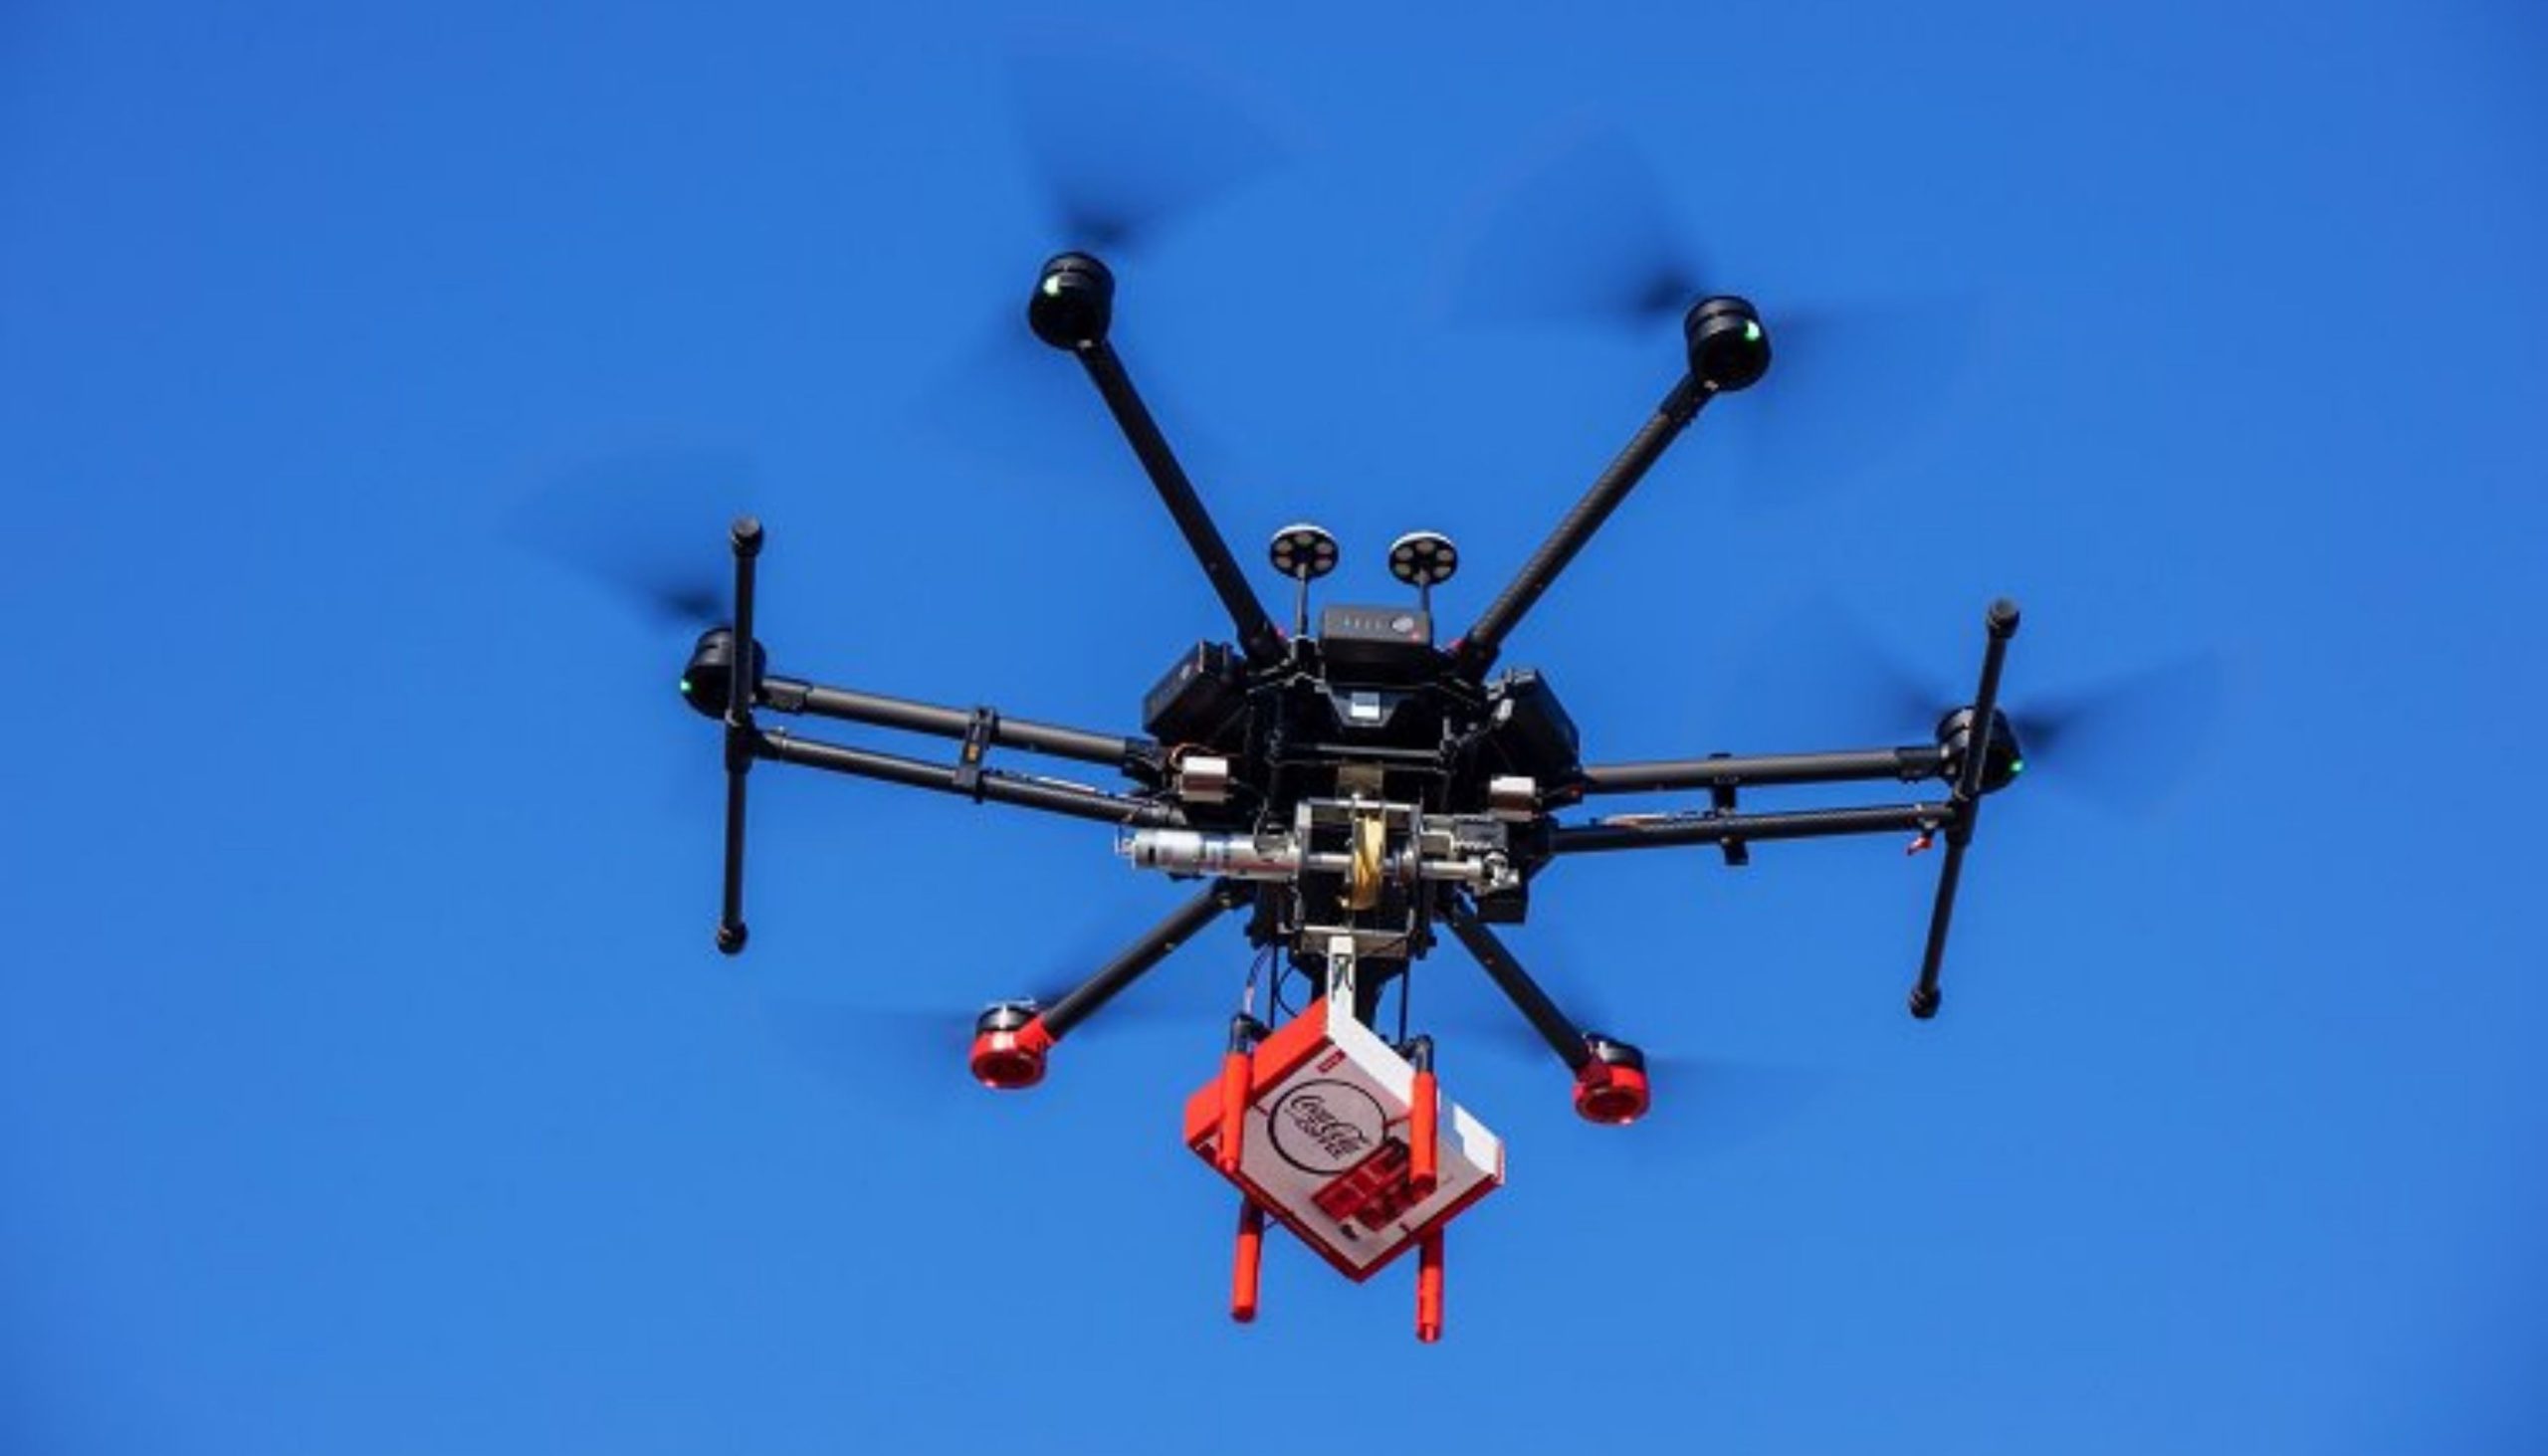 Drones are making a buzz by delivering Coca-Cola with Coffee